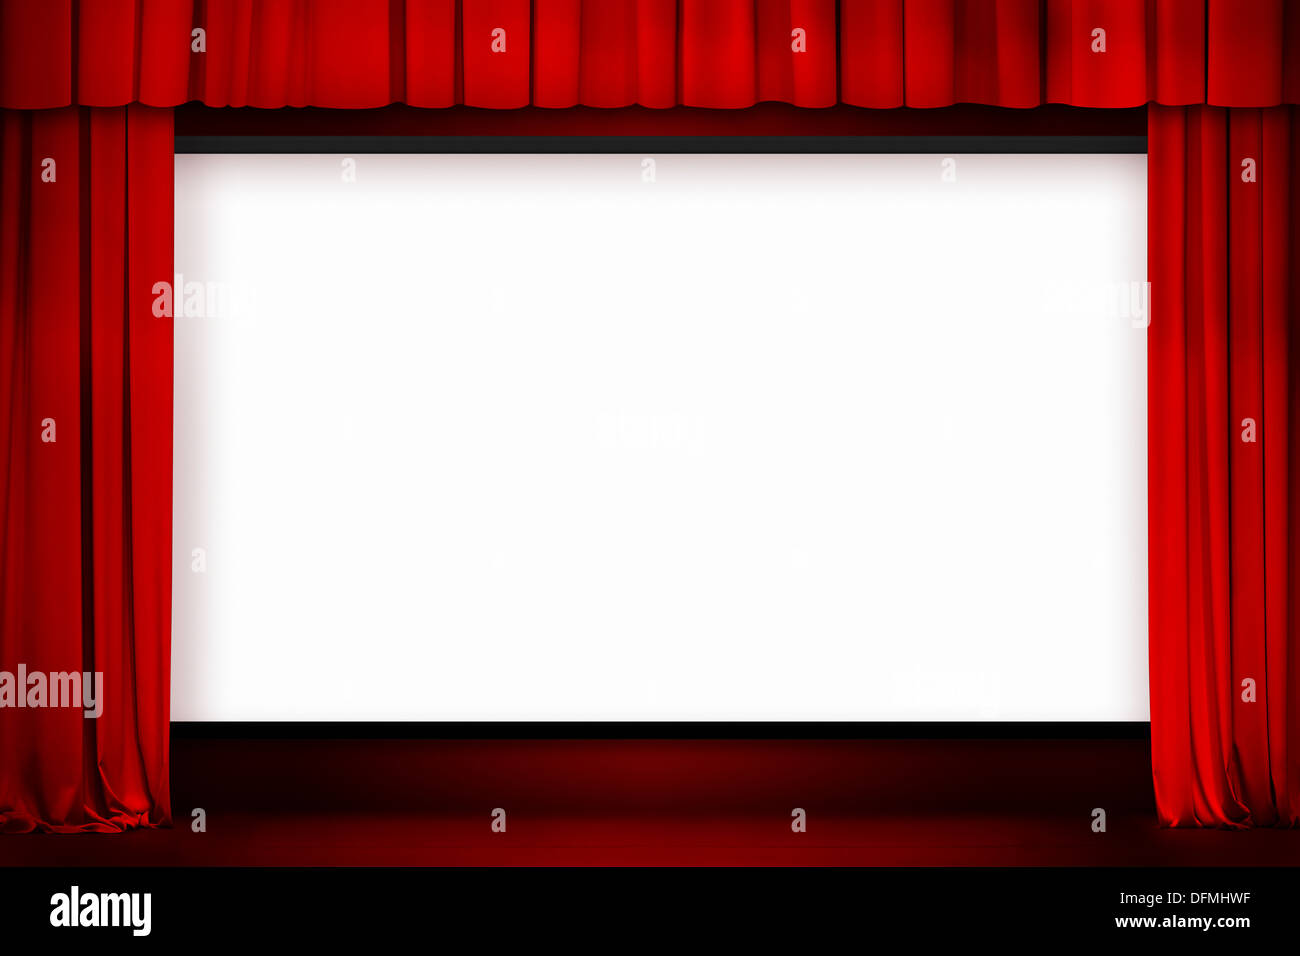 cinema screen with open red curtain Stock Photo